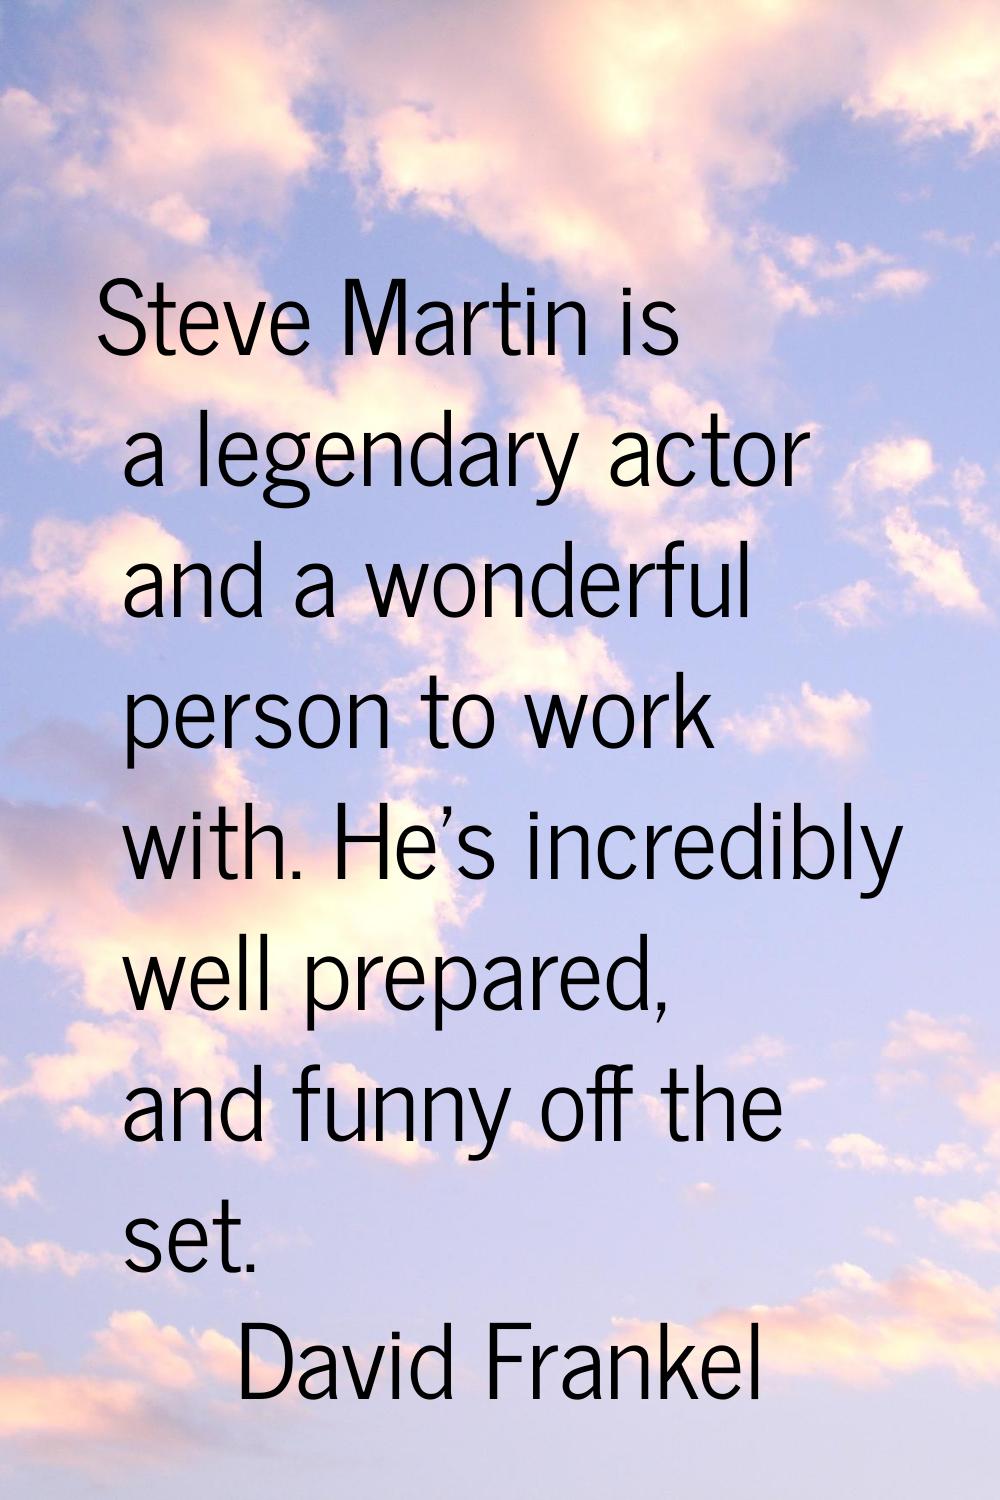 Steve Martin is a legendary actor and a wonderful person to work with. He's incredibly well prepare